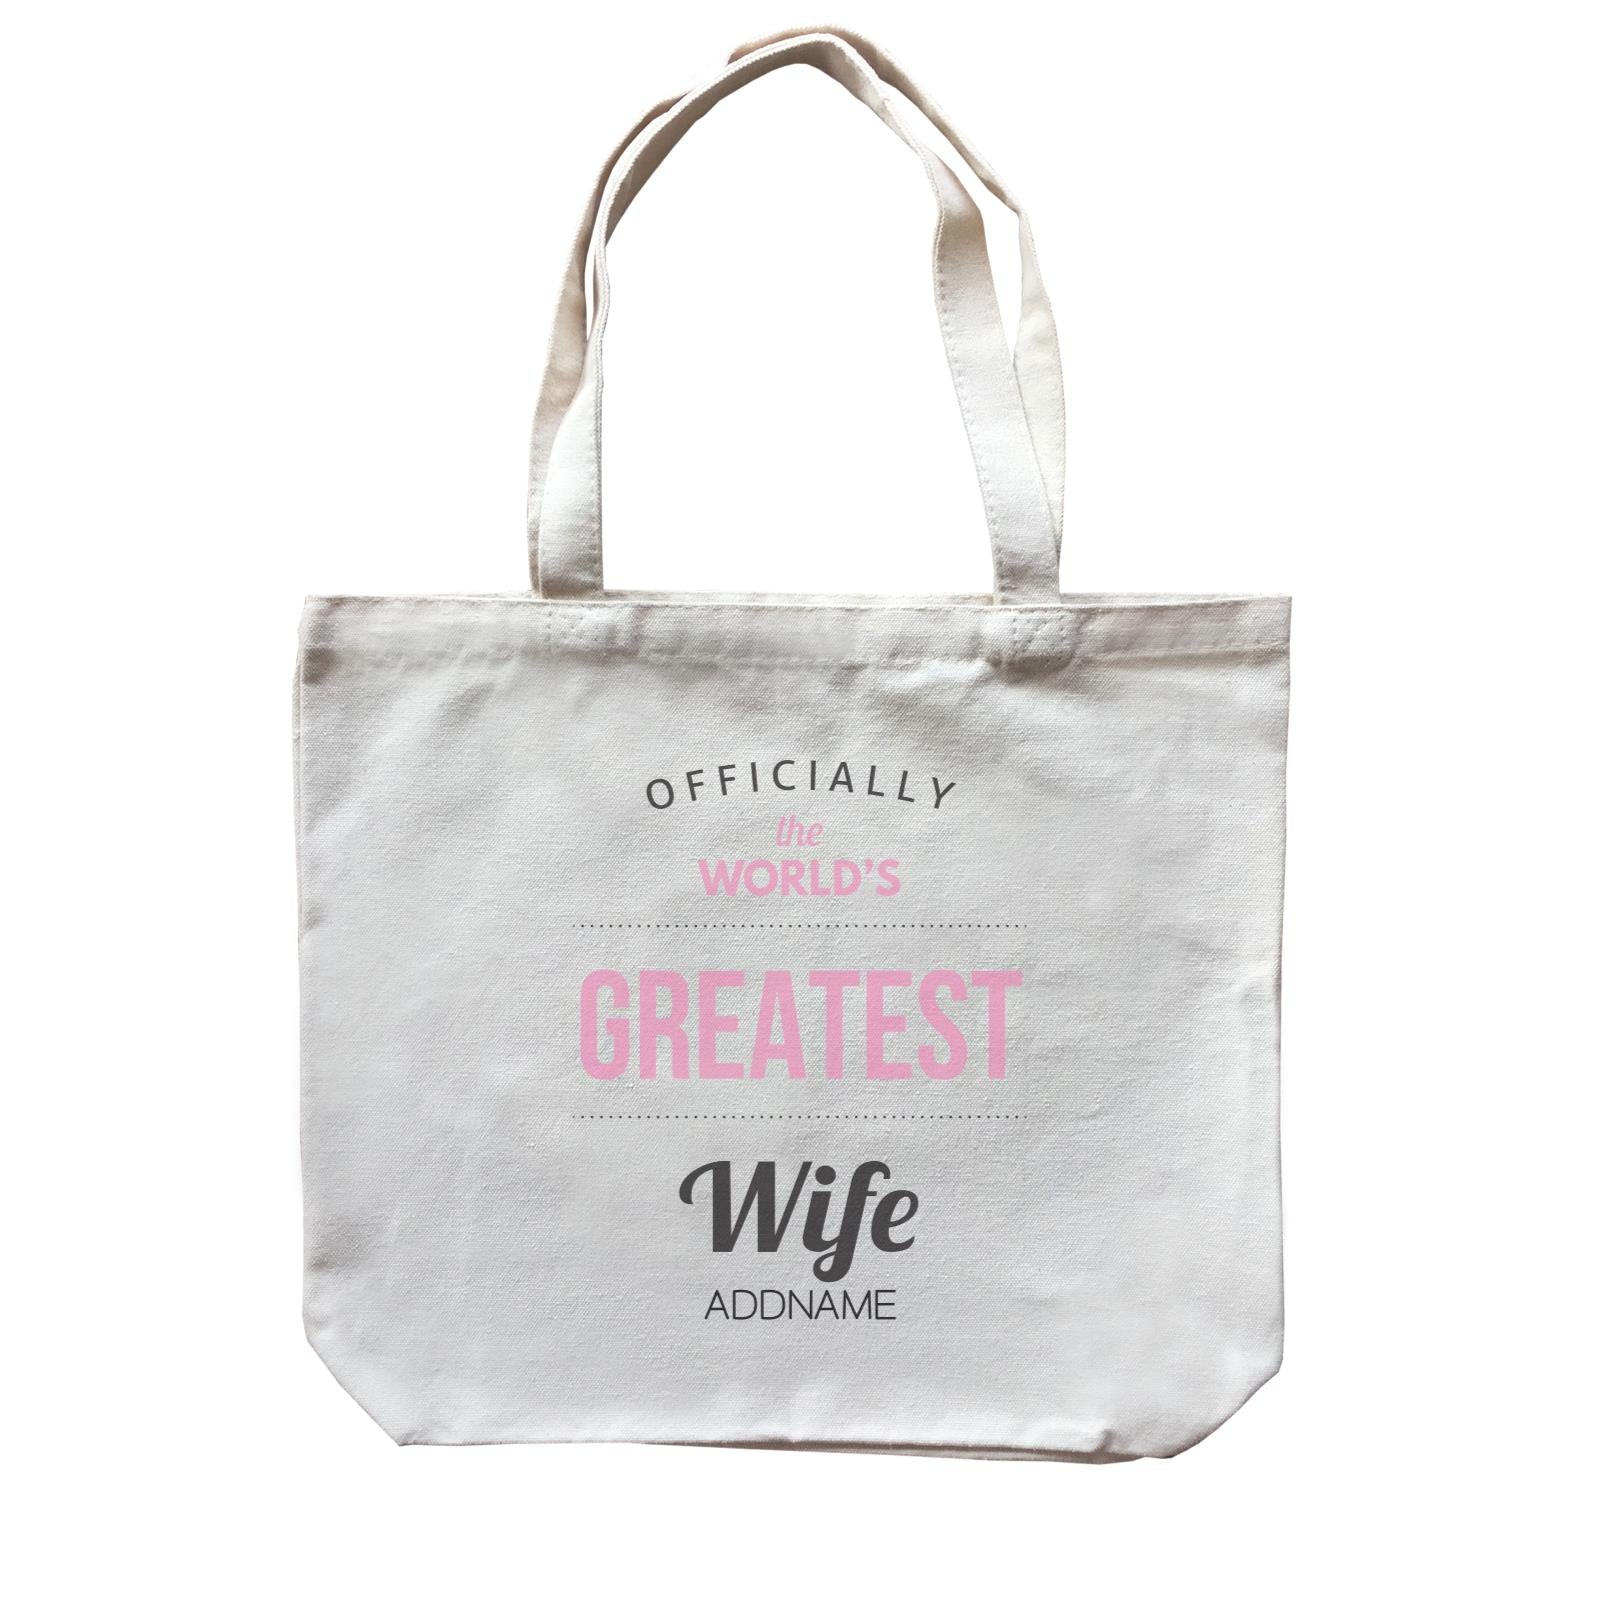 Husband and Wife Officially The World's Geatest Wife Addname Canvas Bag